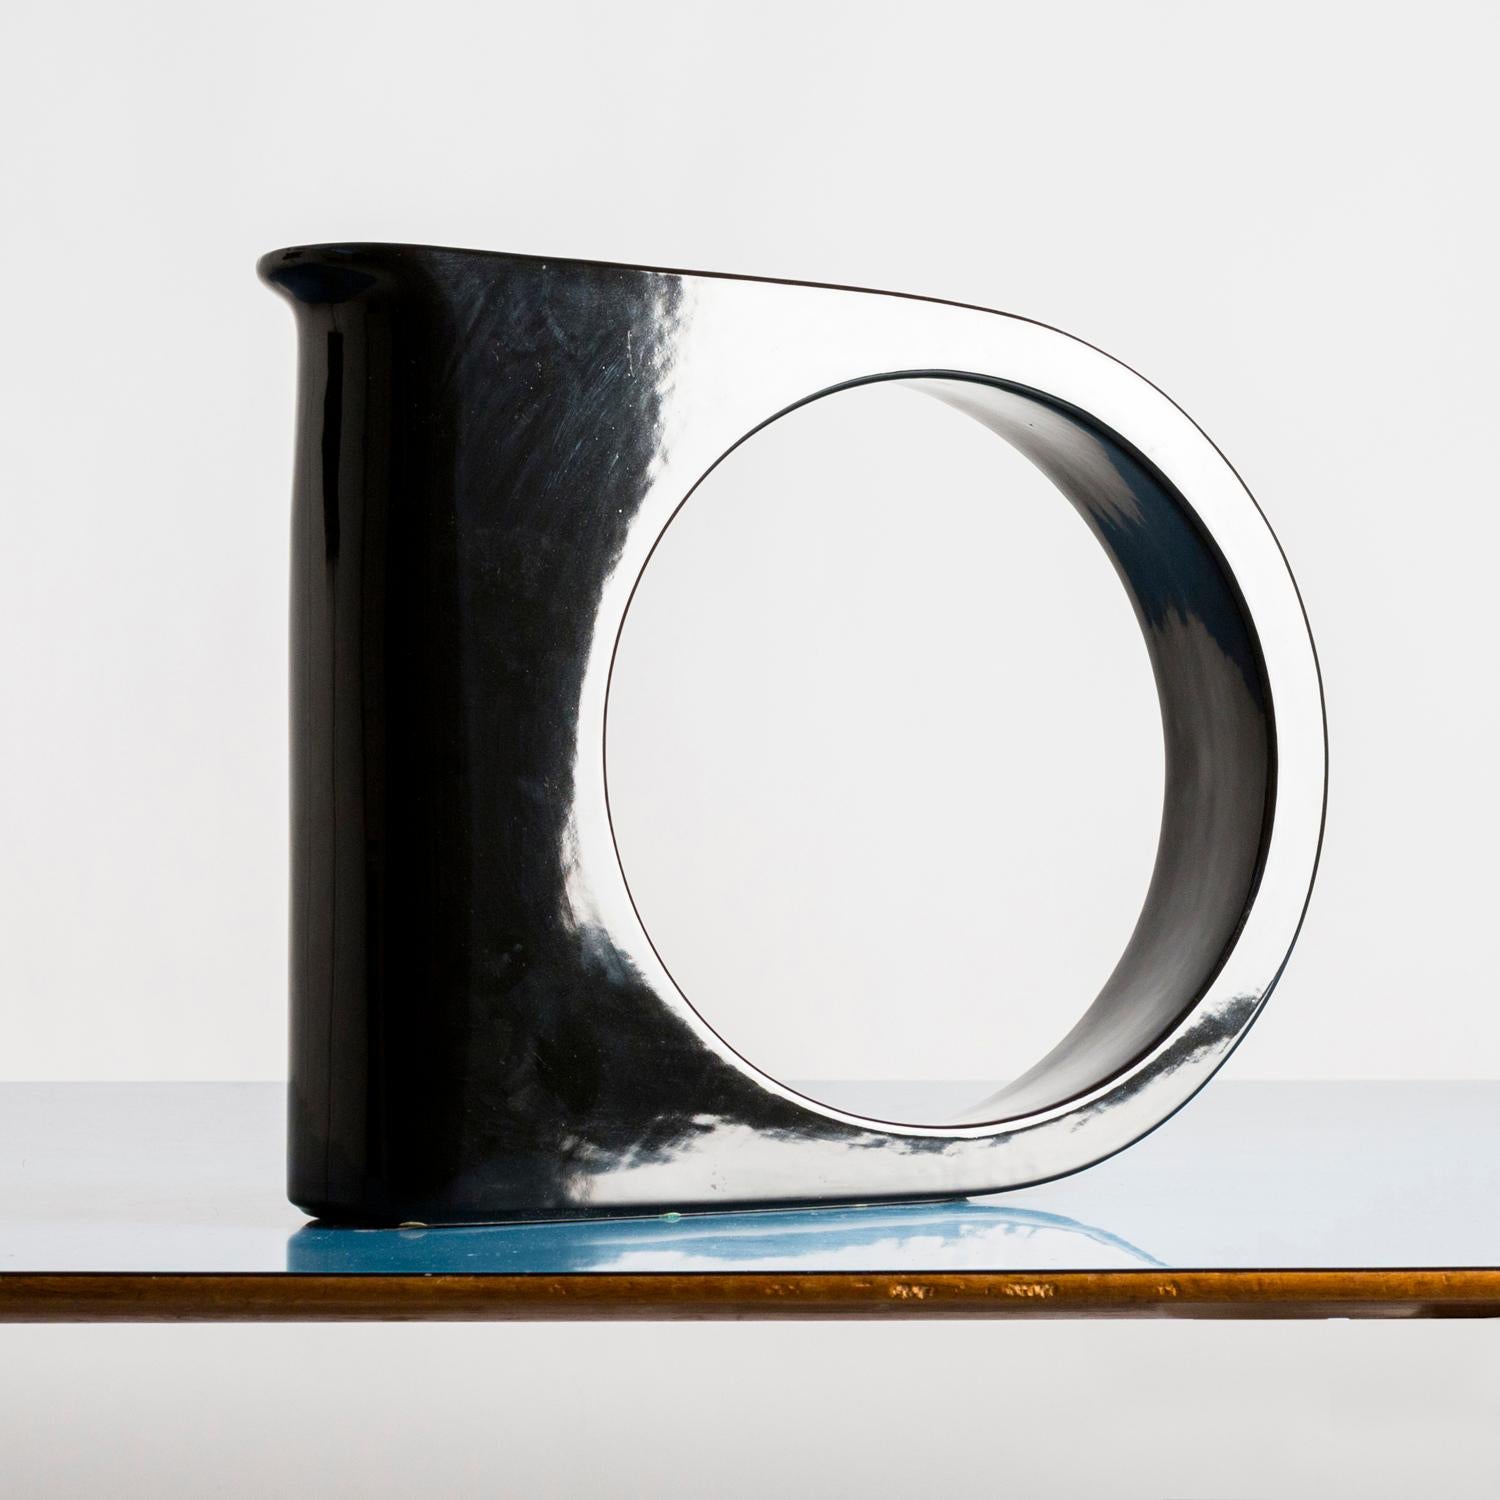 Large enameled ceramic pitcher designed in the 1970s by Petro Arosio and manufactured by Ceramiche Parravicini, Italy.